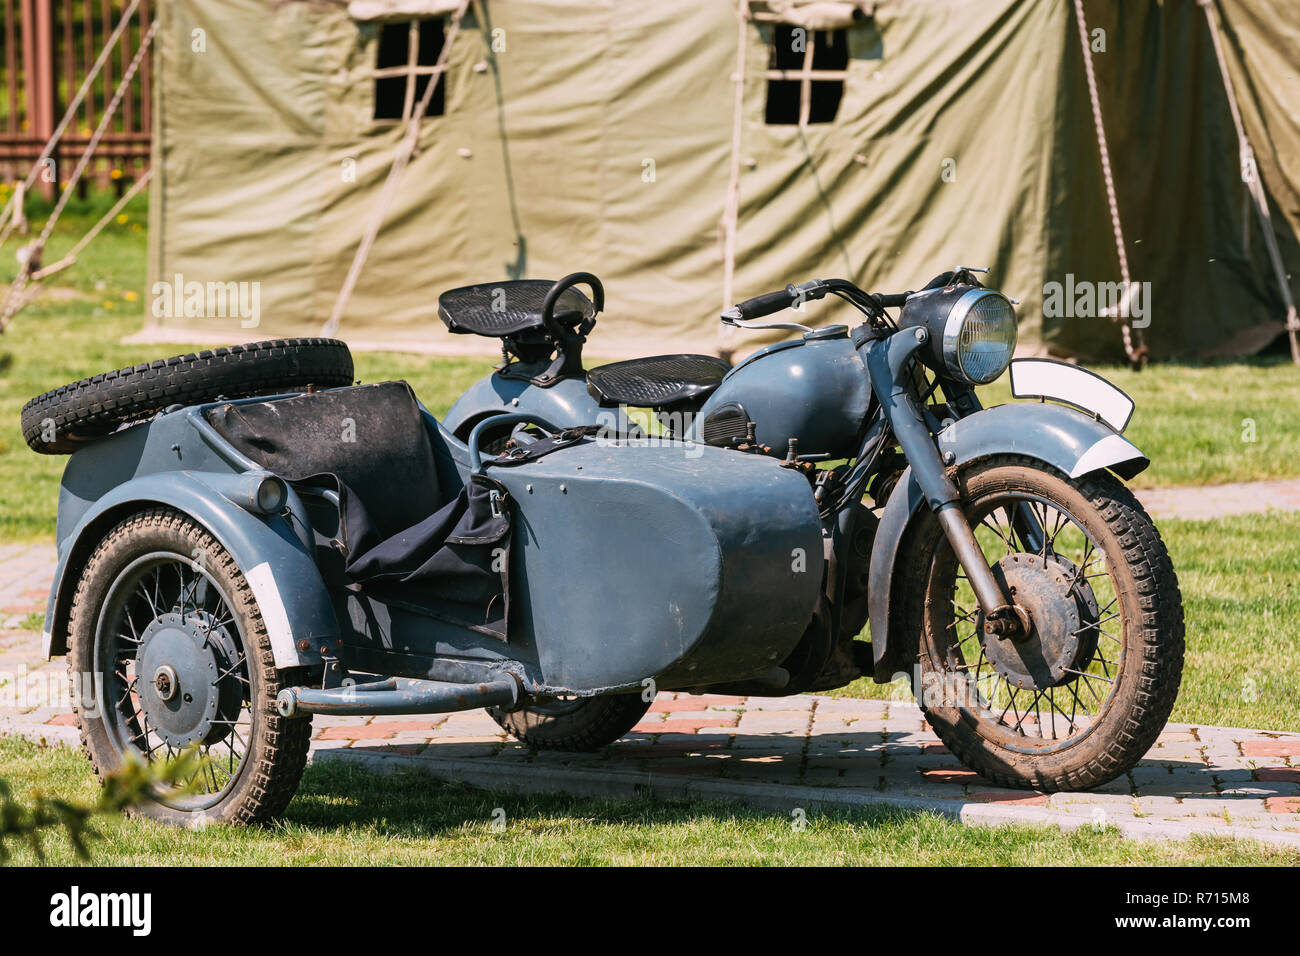 The Old Rarity Tricar, Three-Wheeled Gray Motorcycle With A Sidecar Of German Forces Of World War 2 Time Standing As An Exhibit In Summer Sunny Park. Stock Photo